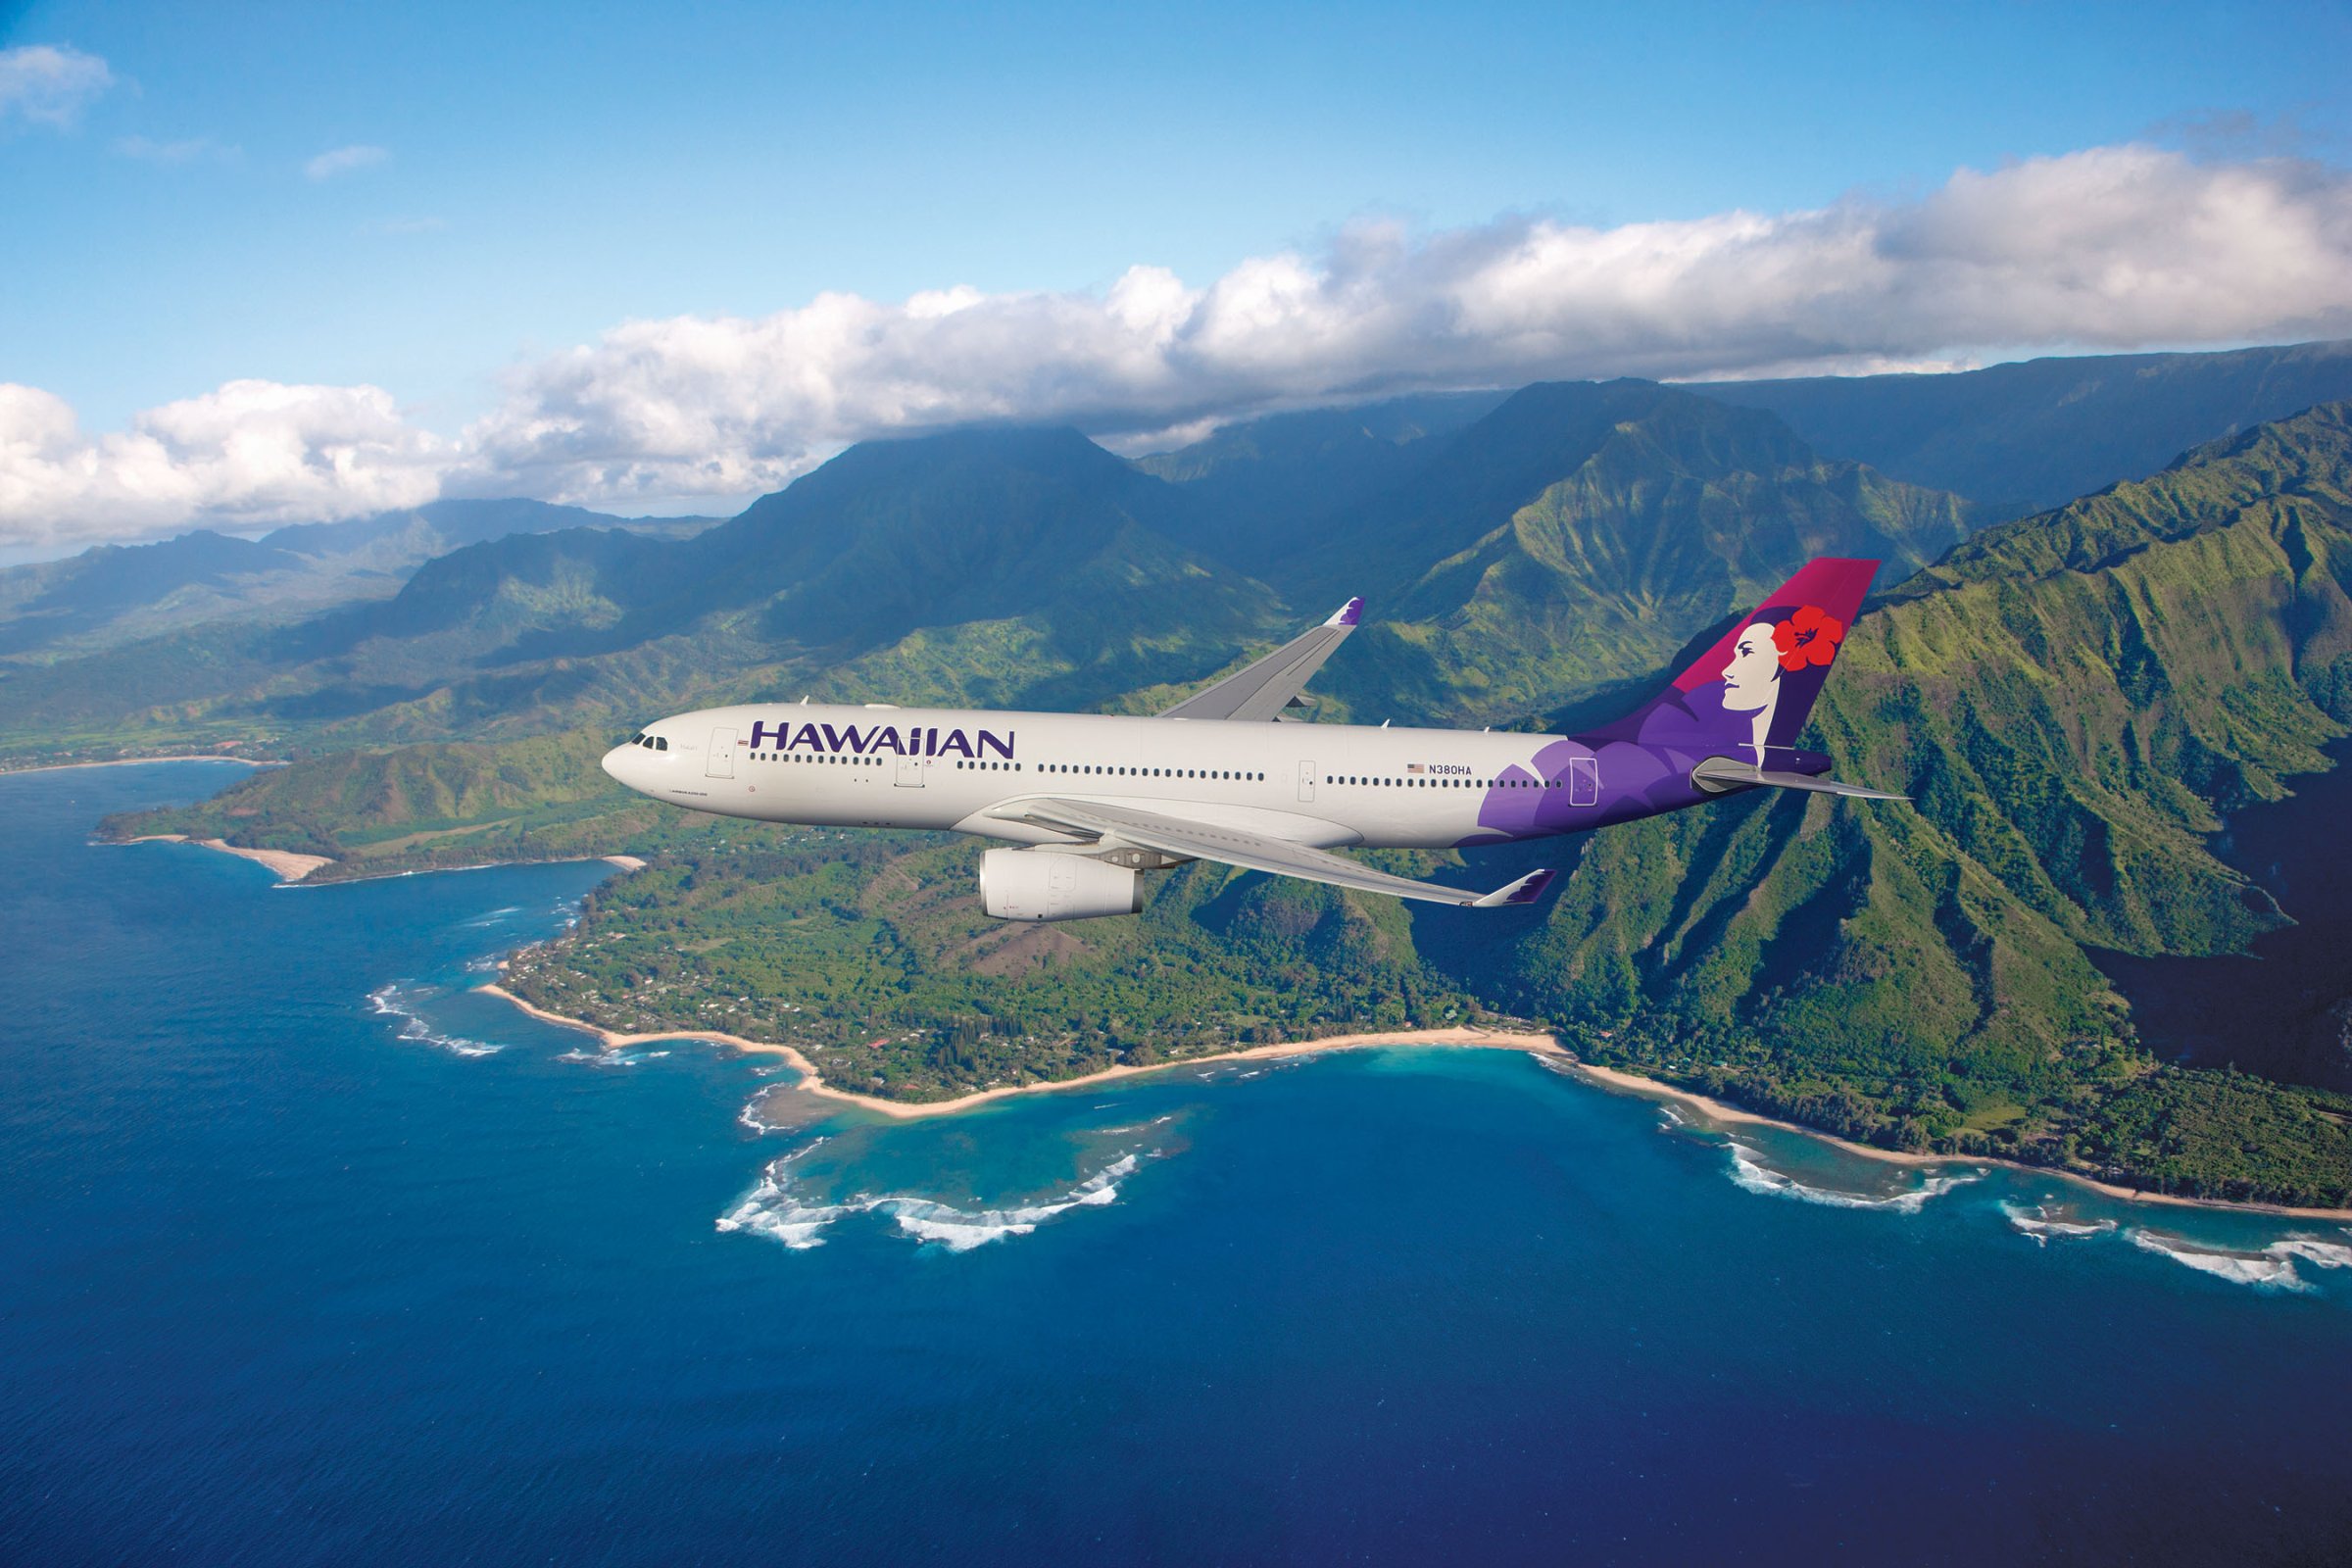 Hawaiian Airlines' wide-body, twin-aisle Airbus A330-200 aircraft.